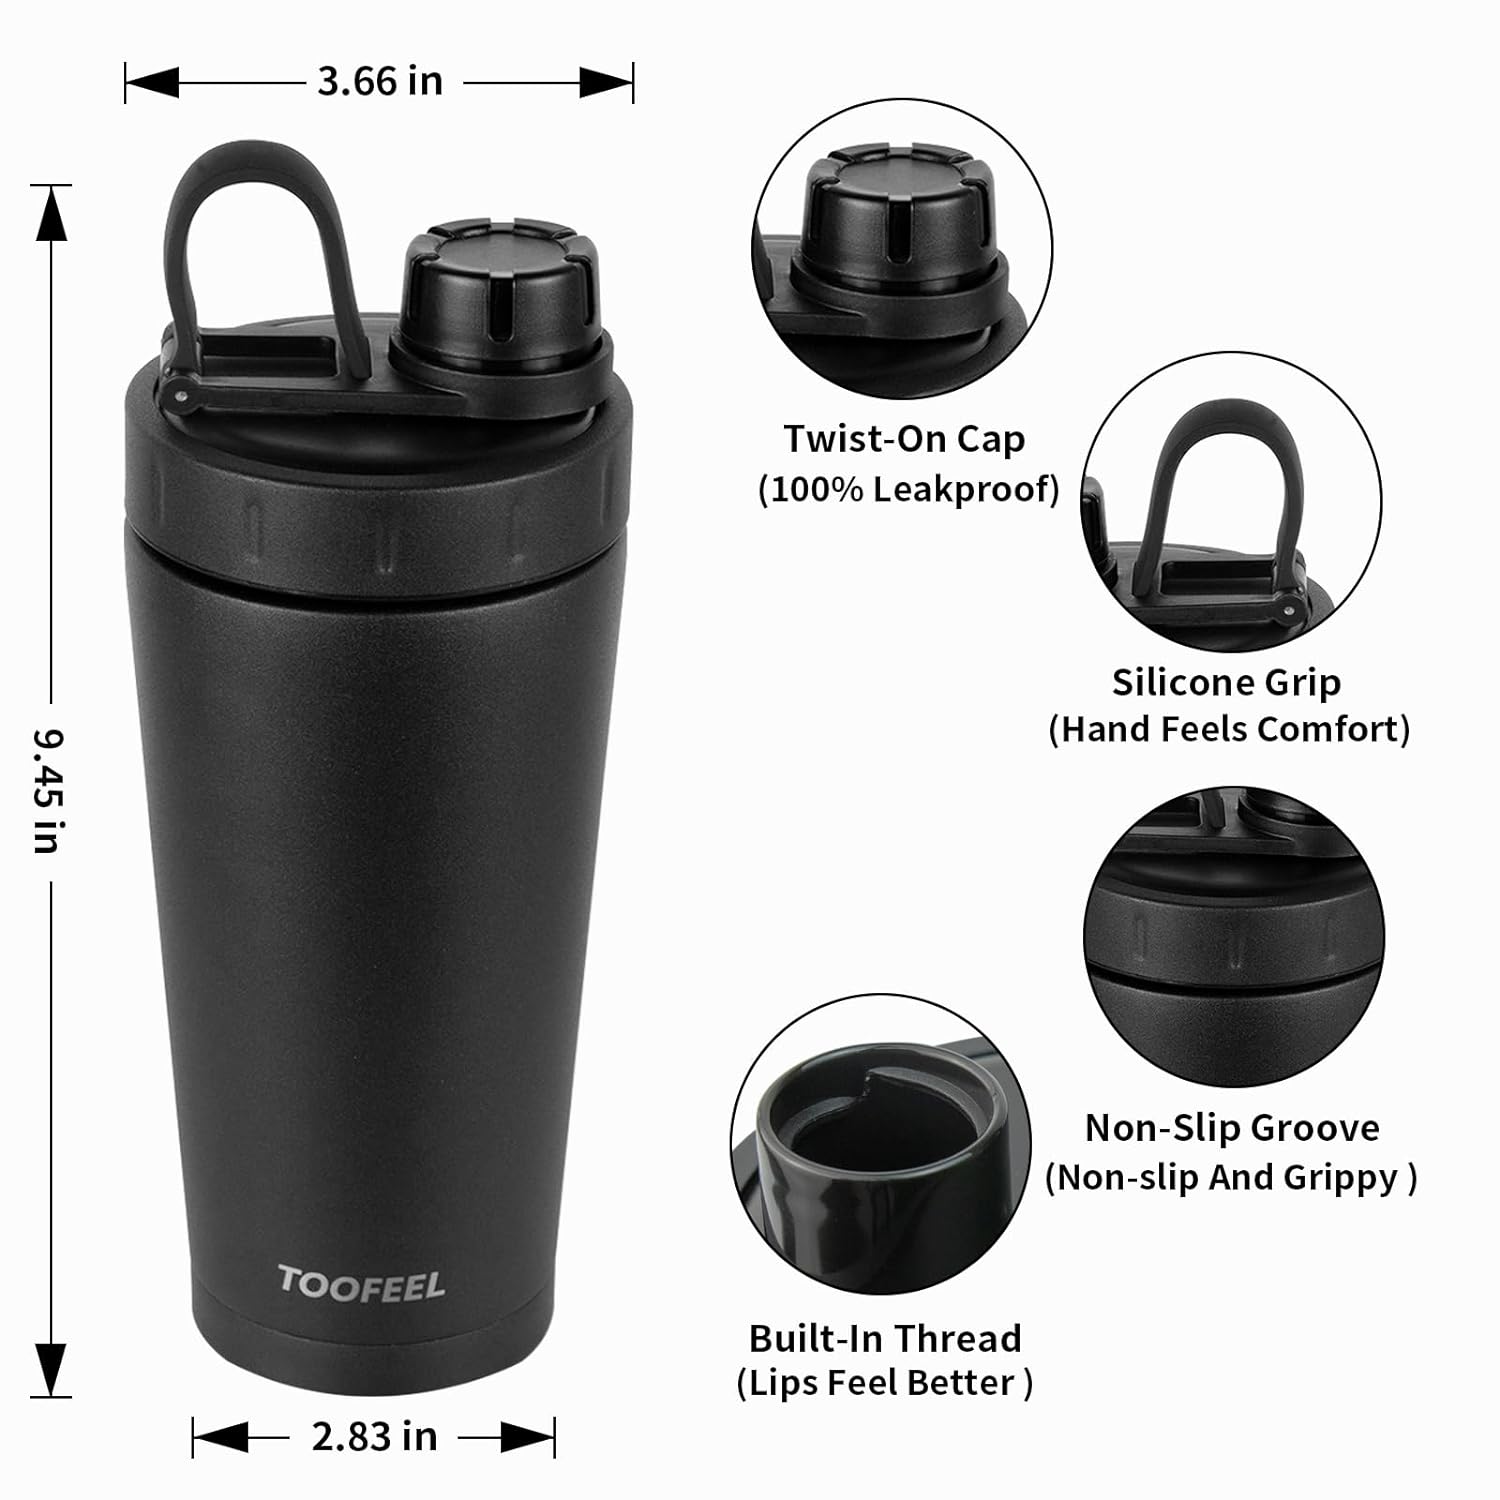 TOOFEEL Shaker Bottle Stainless Steel - 20 oz Double Walled Insulated Shaker Cups for Protein Shakes, Keeps Cold/Hot, Shaker Bottle for Protein Mixes, Gym Workout Protein Shaker Bottle